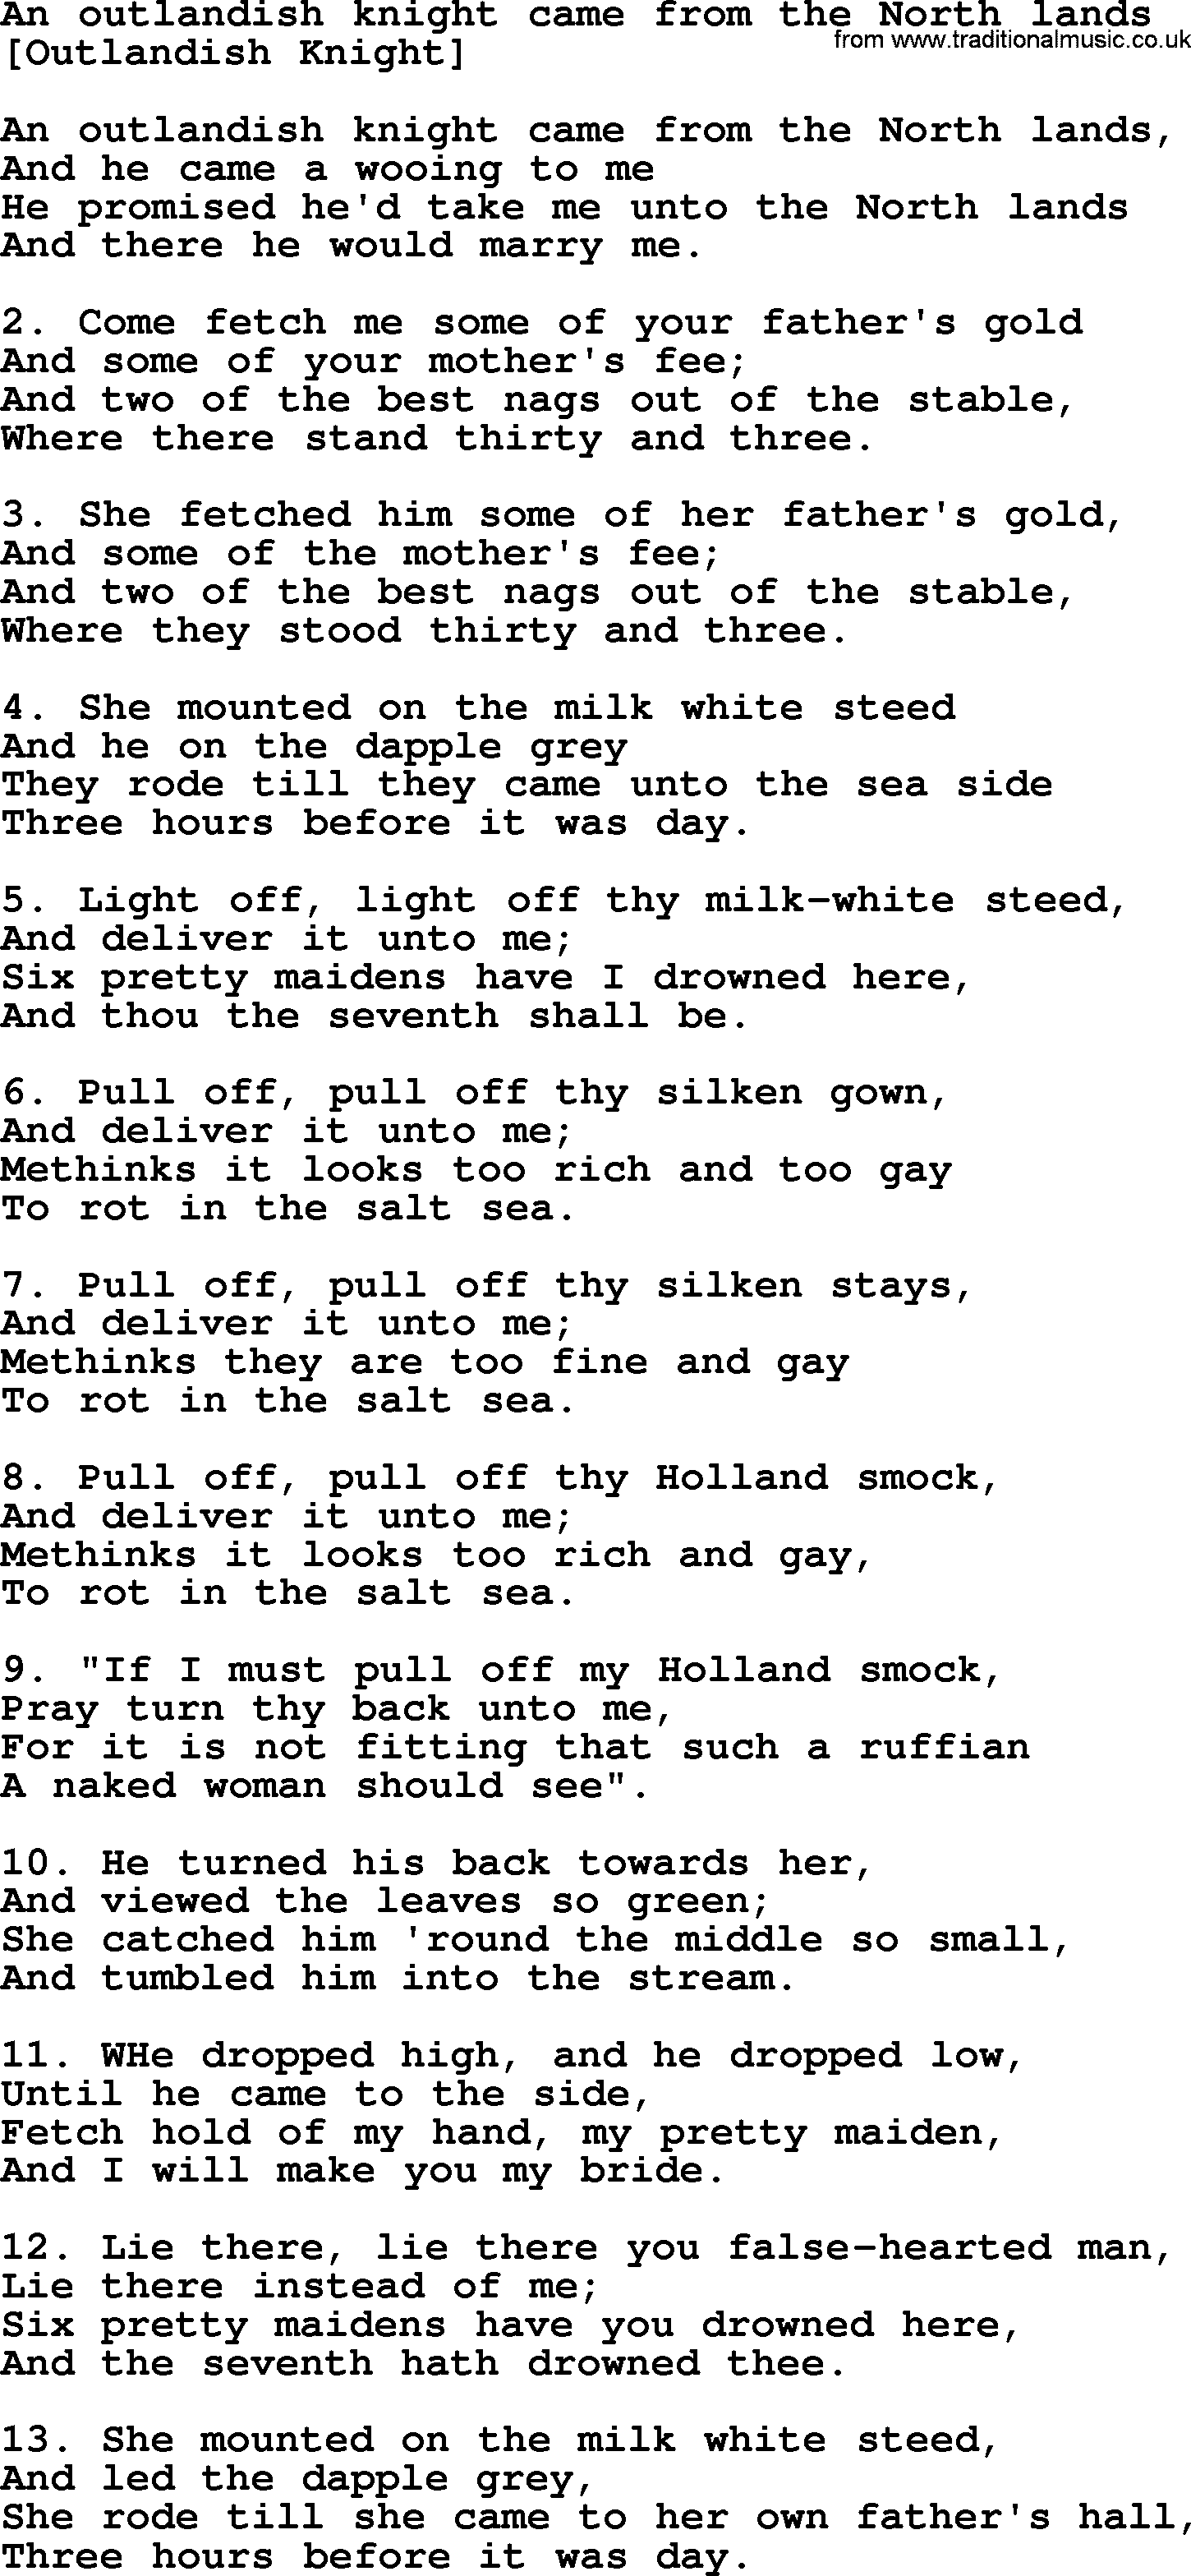 Old English Song: An Outlandish Knight Came From The North Lands lyrics